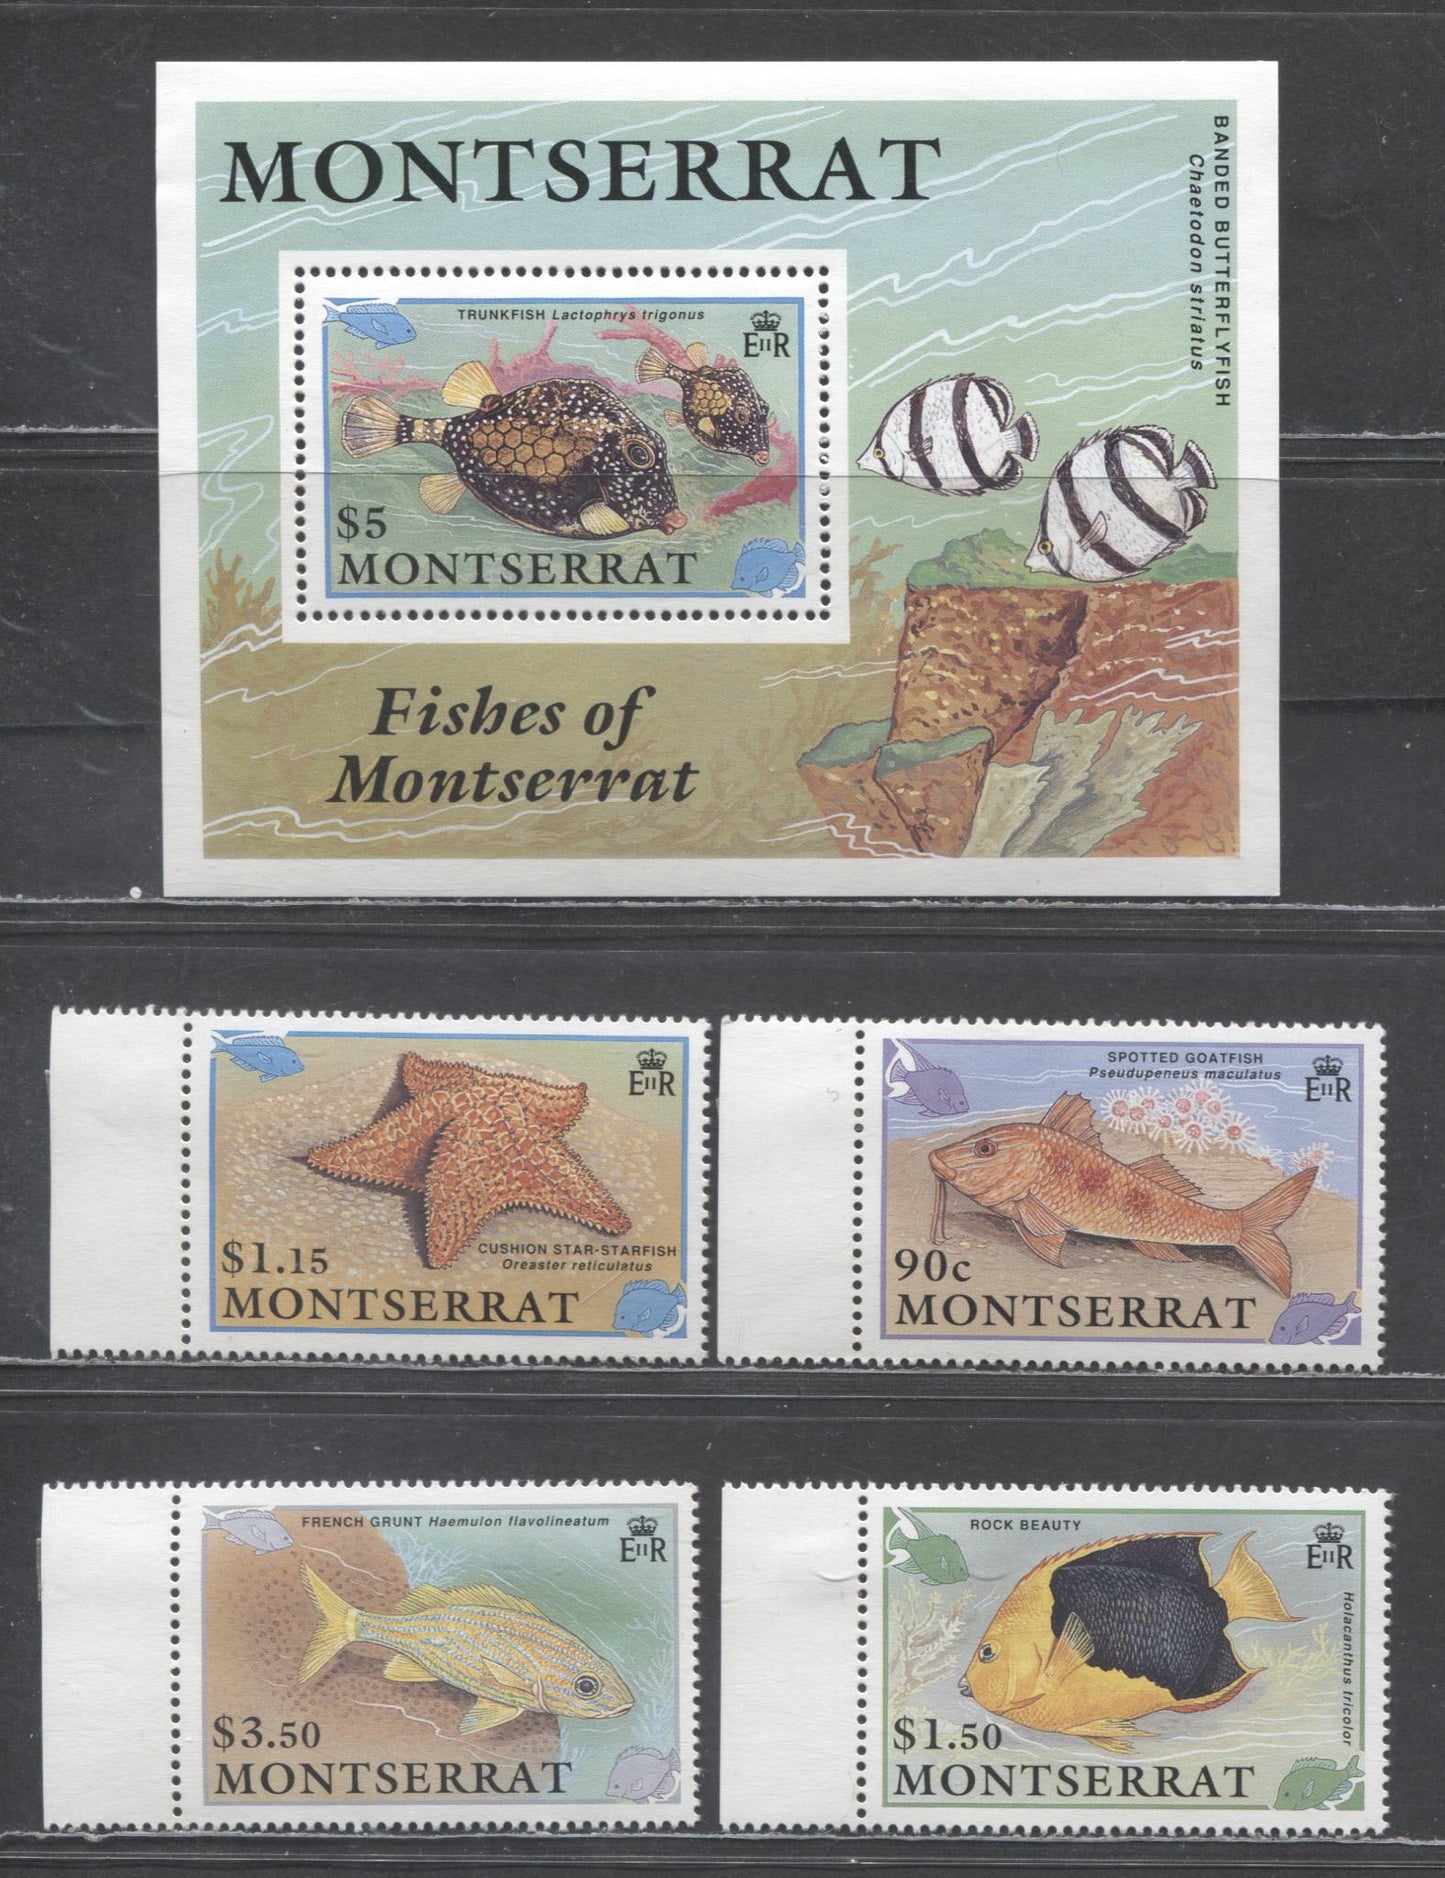 Lot 93 Montserrat SC#758-762 1991 Fish Issue, 5 VFNH & OG Singles & Souvenir Sheet, Click on Listing to See ALL Pictures, 2017 Scott Cat. $27.5